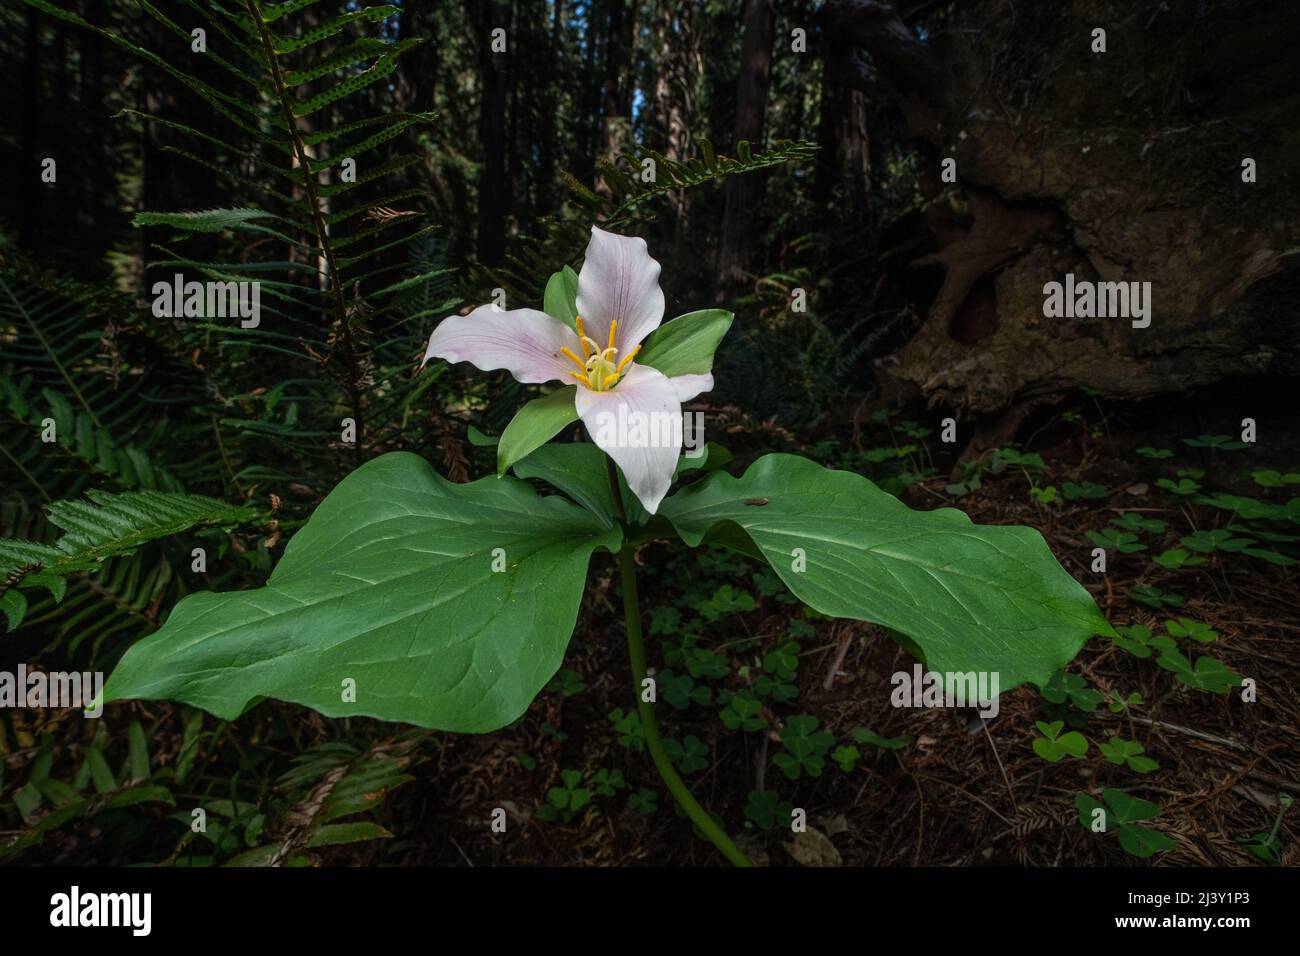 Trillium ovatum, the Pacific trillium, growing and flowering on the forest floor in a old growth redwood forest in Northern California. Stock Photo